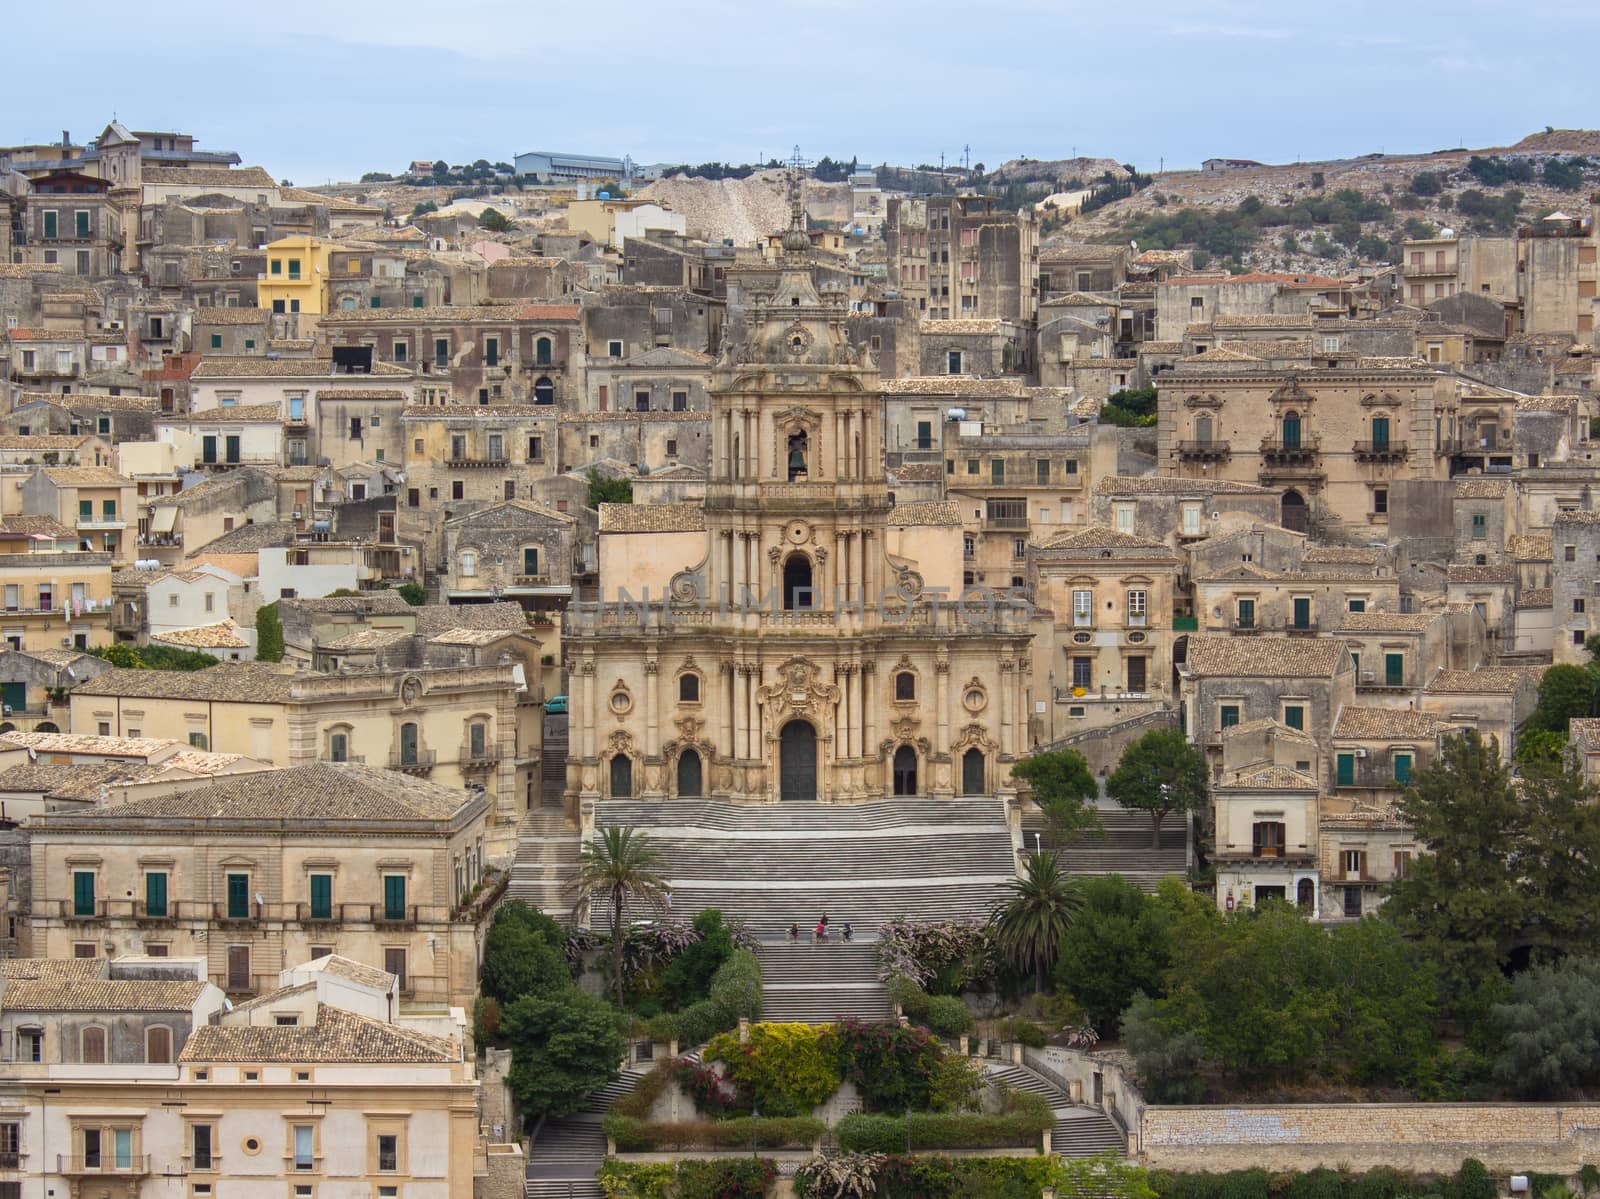 Overview of Modica in Sicily, famous for the strong presence of Baroque architecture